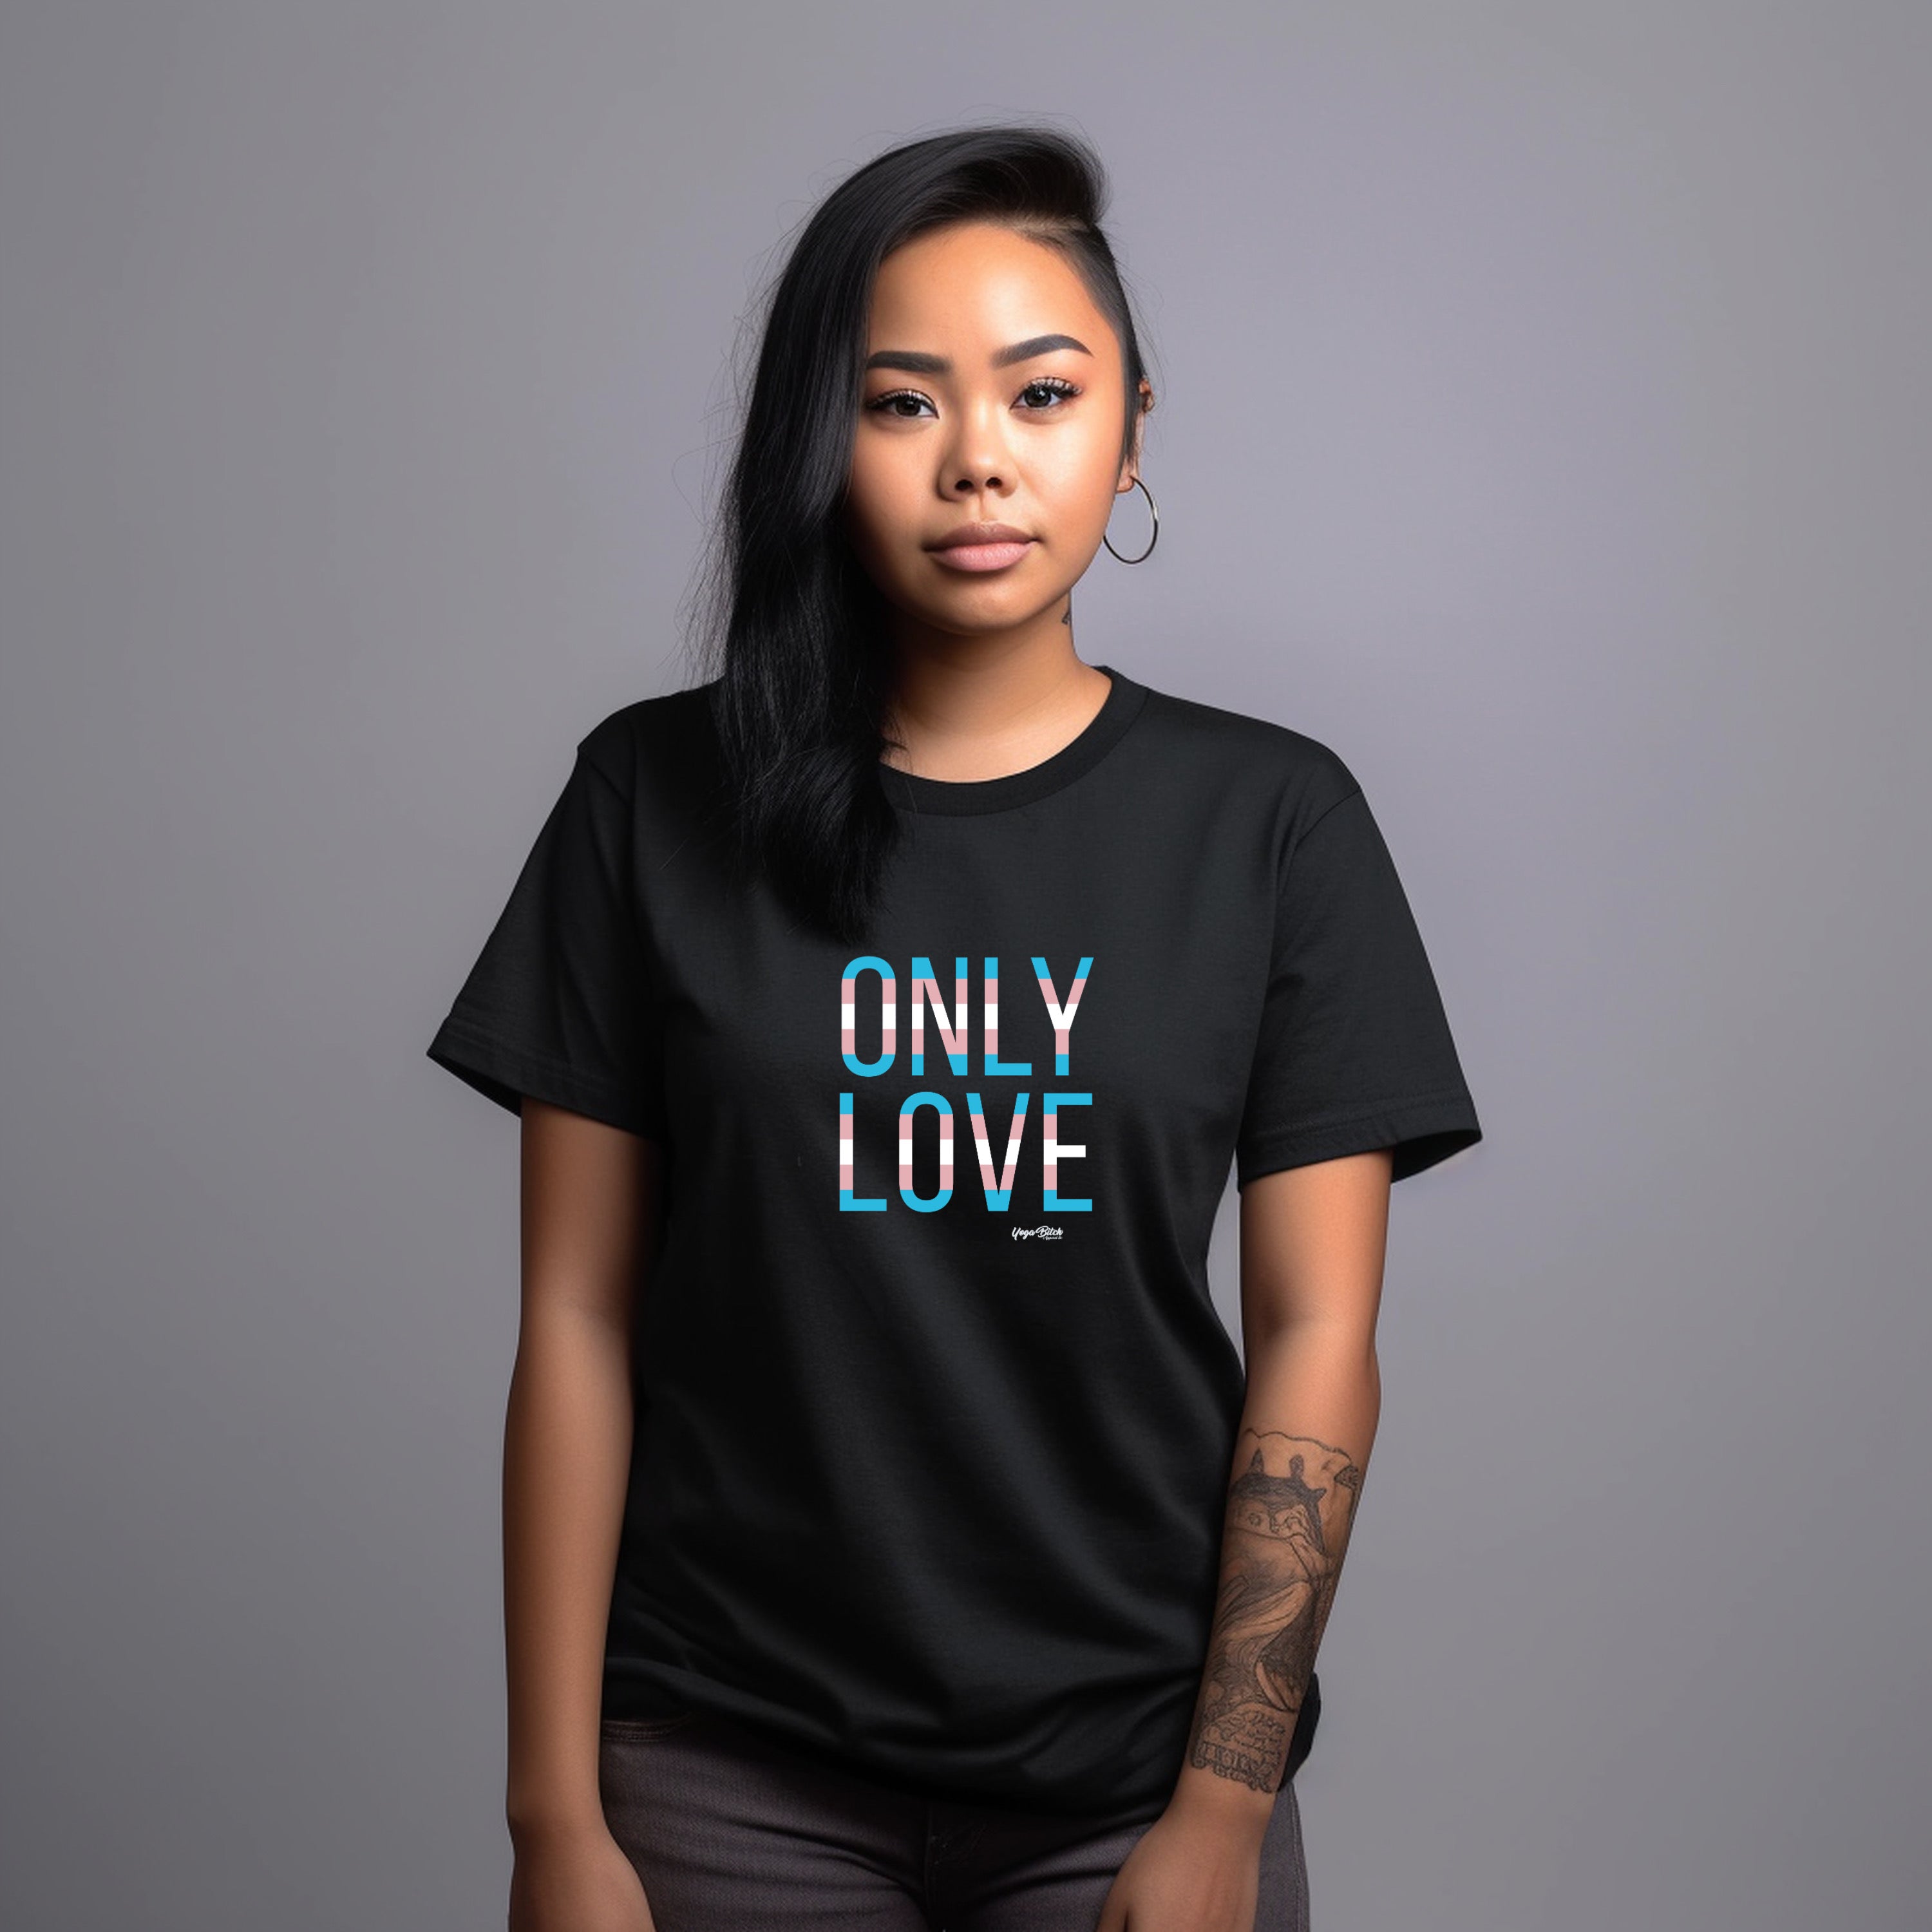 ONLY LOVE Trans Pride Everyday Oversized Shortsleeve Tee - Yoga Bitch